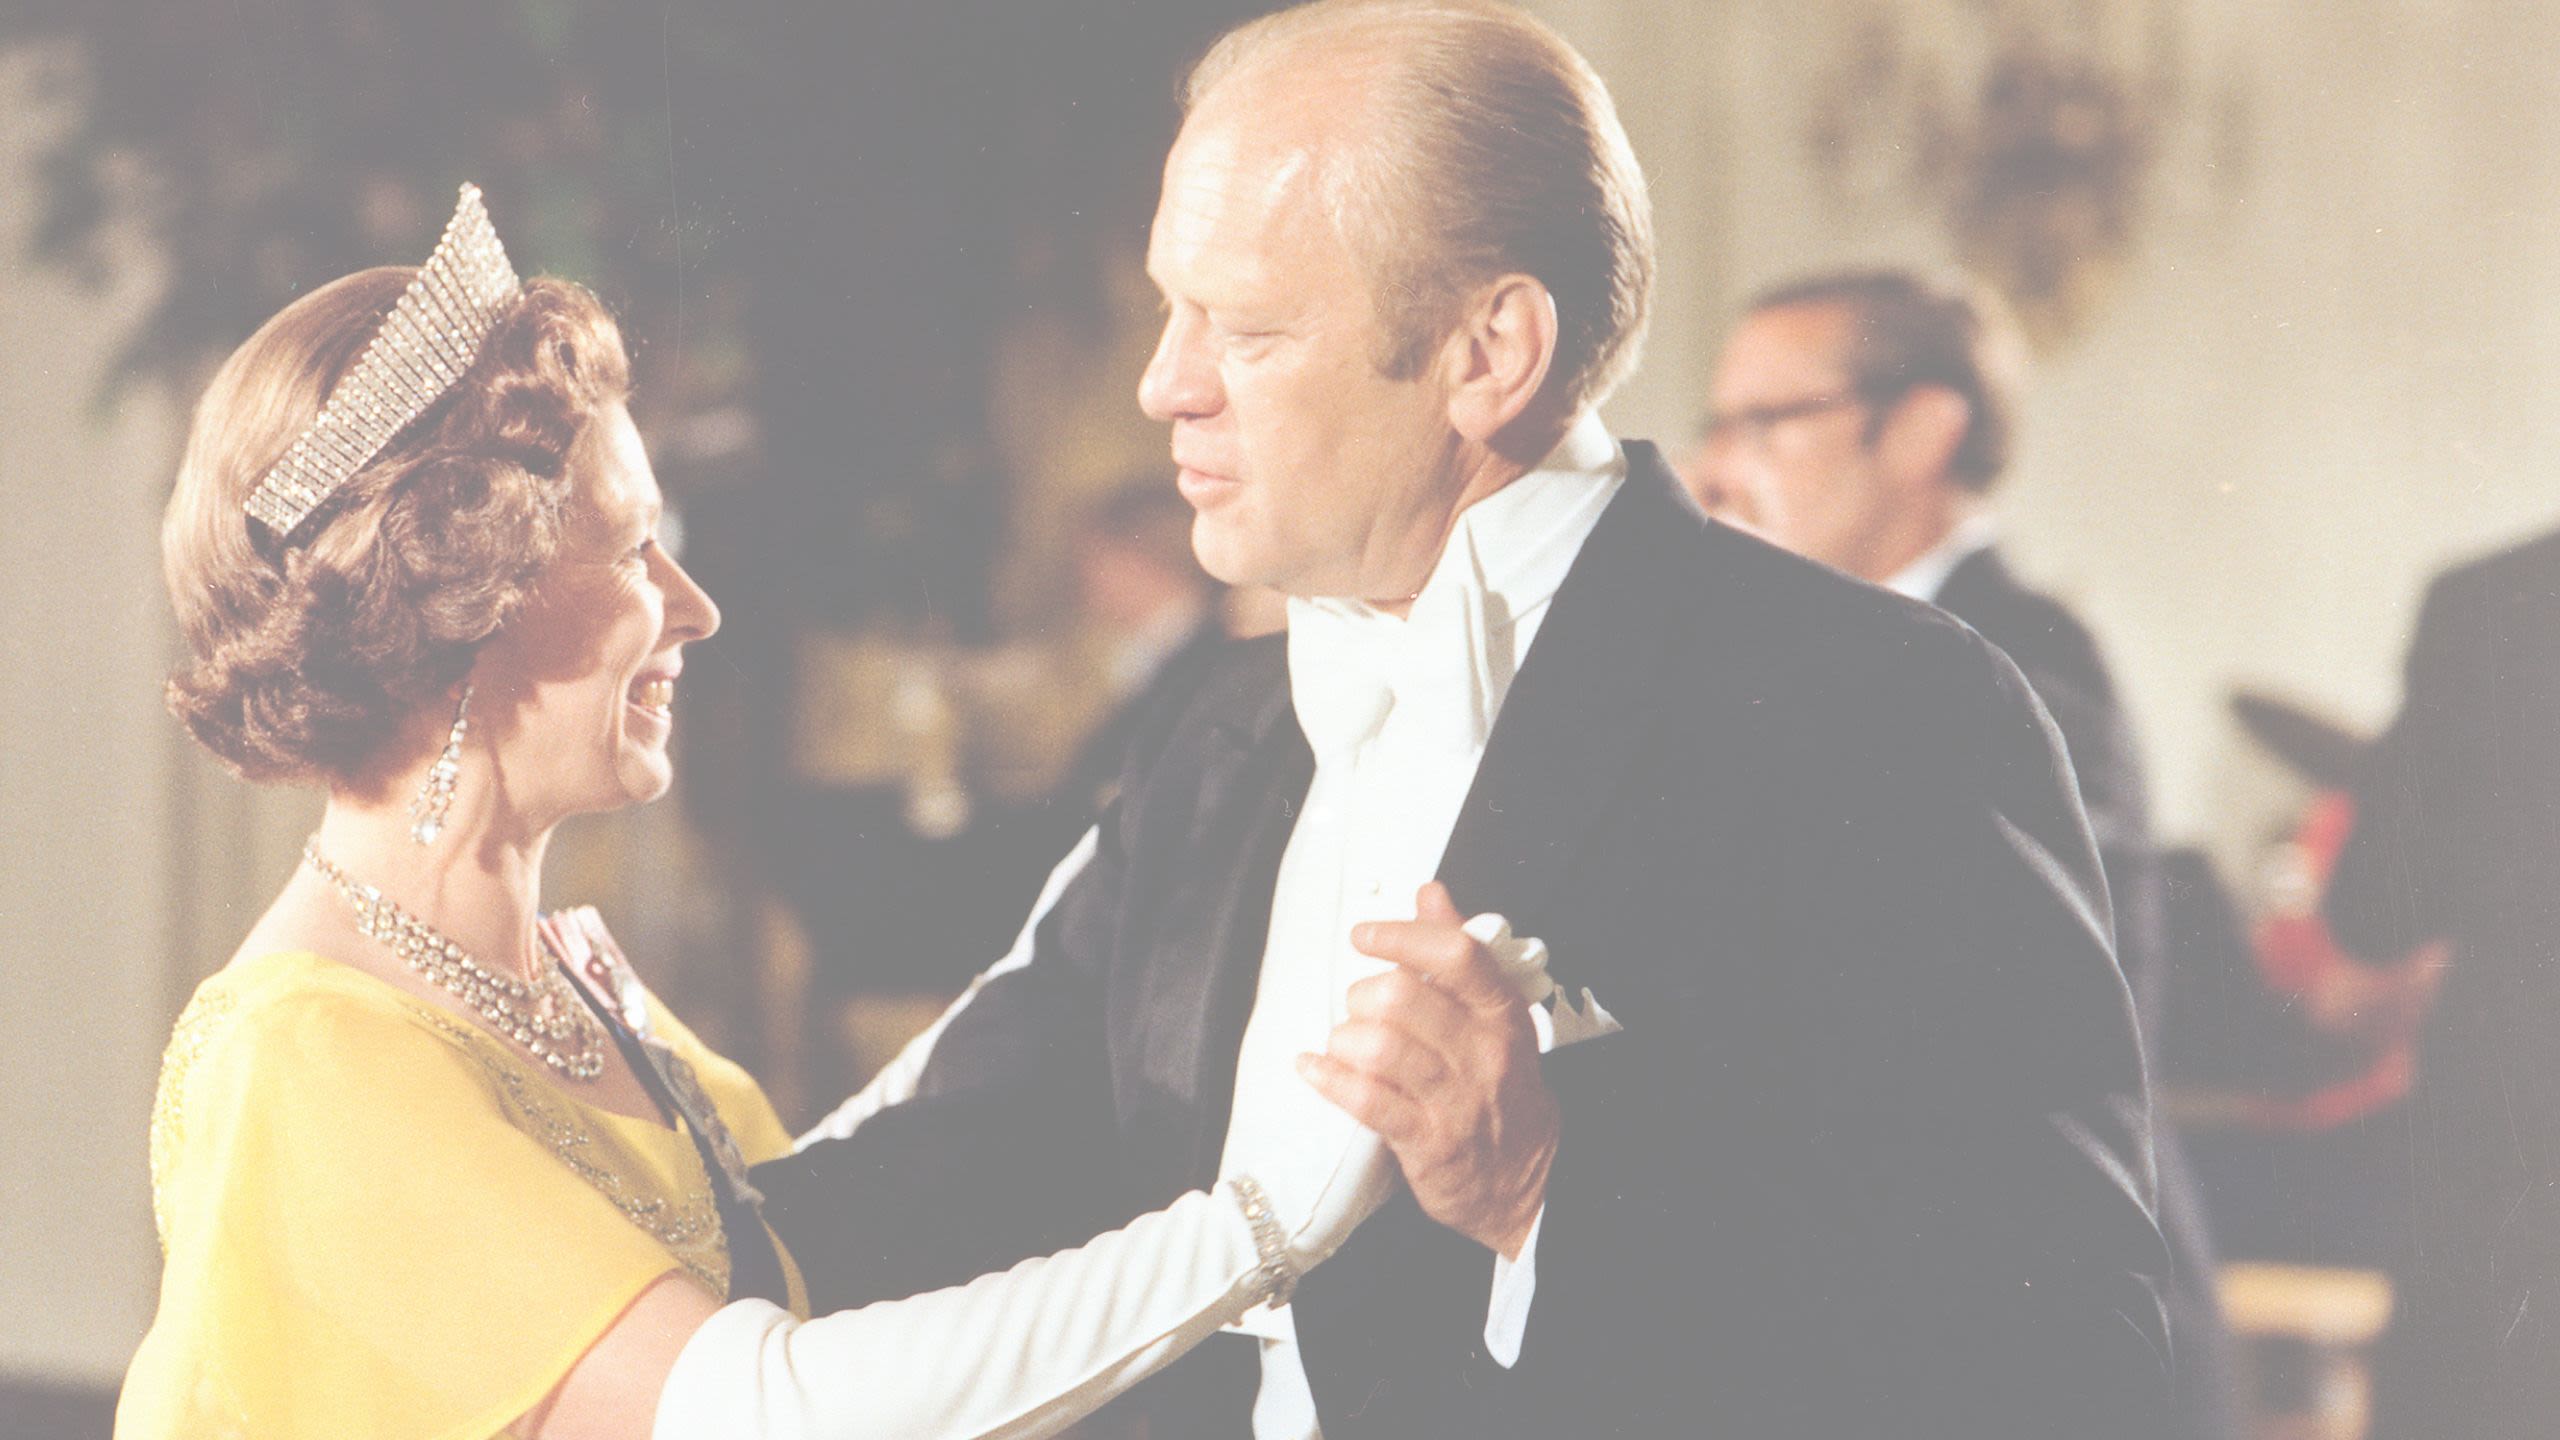 American President Gerald Ford dances with Queen Elizabeth